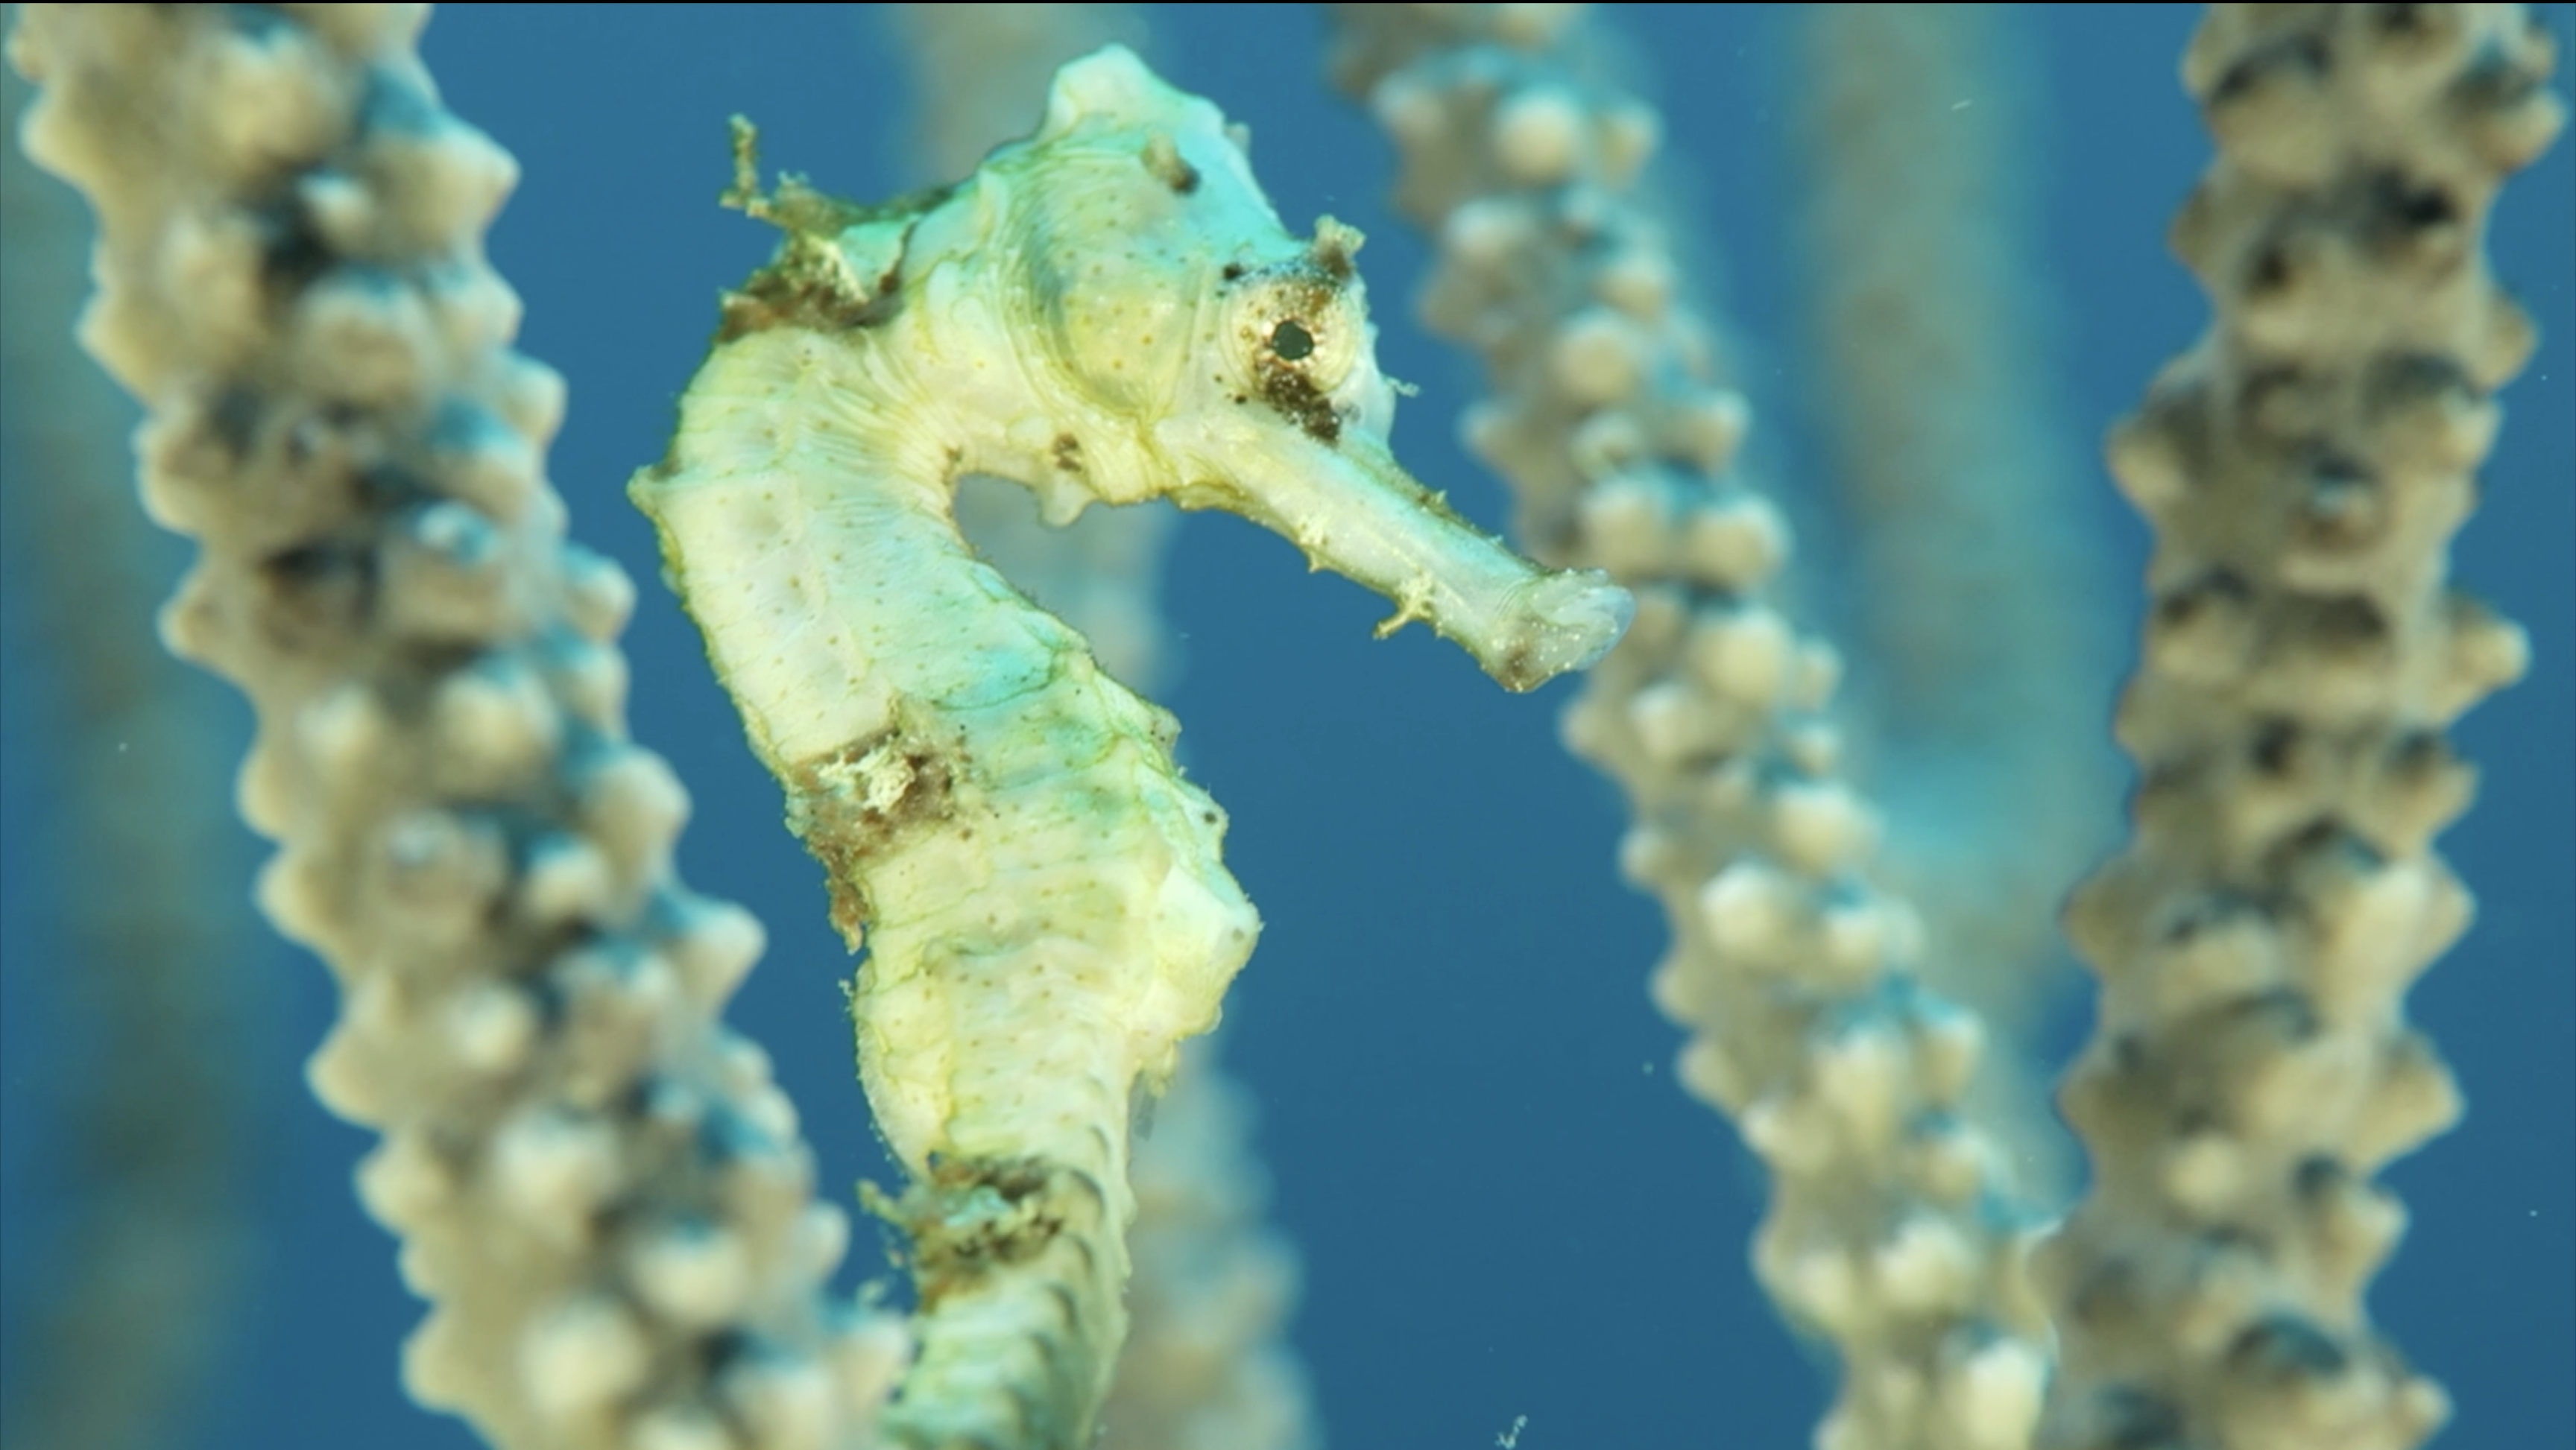  Roatan, Honduras: Pervaiz affectionately refers to this longsnout seahorse as the “White Knight.” He spends a great deal of time selecting the perfect original (not copyrighted) music to accompany his videos. 